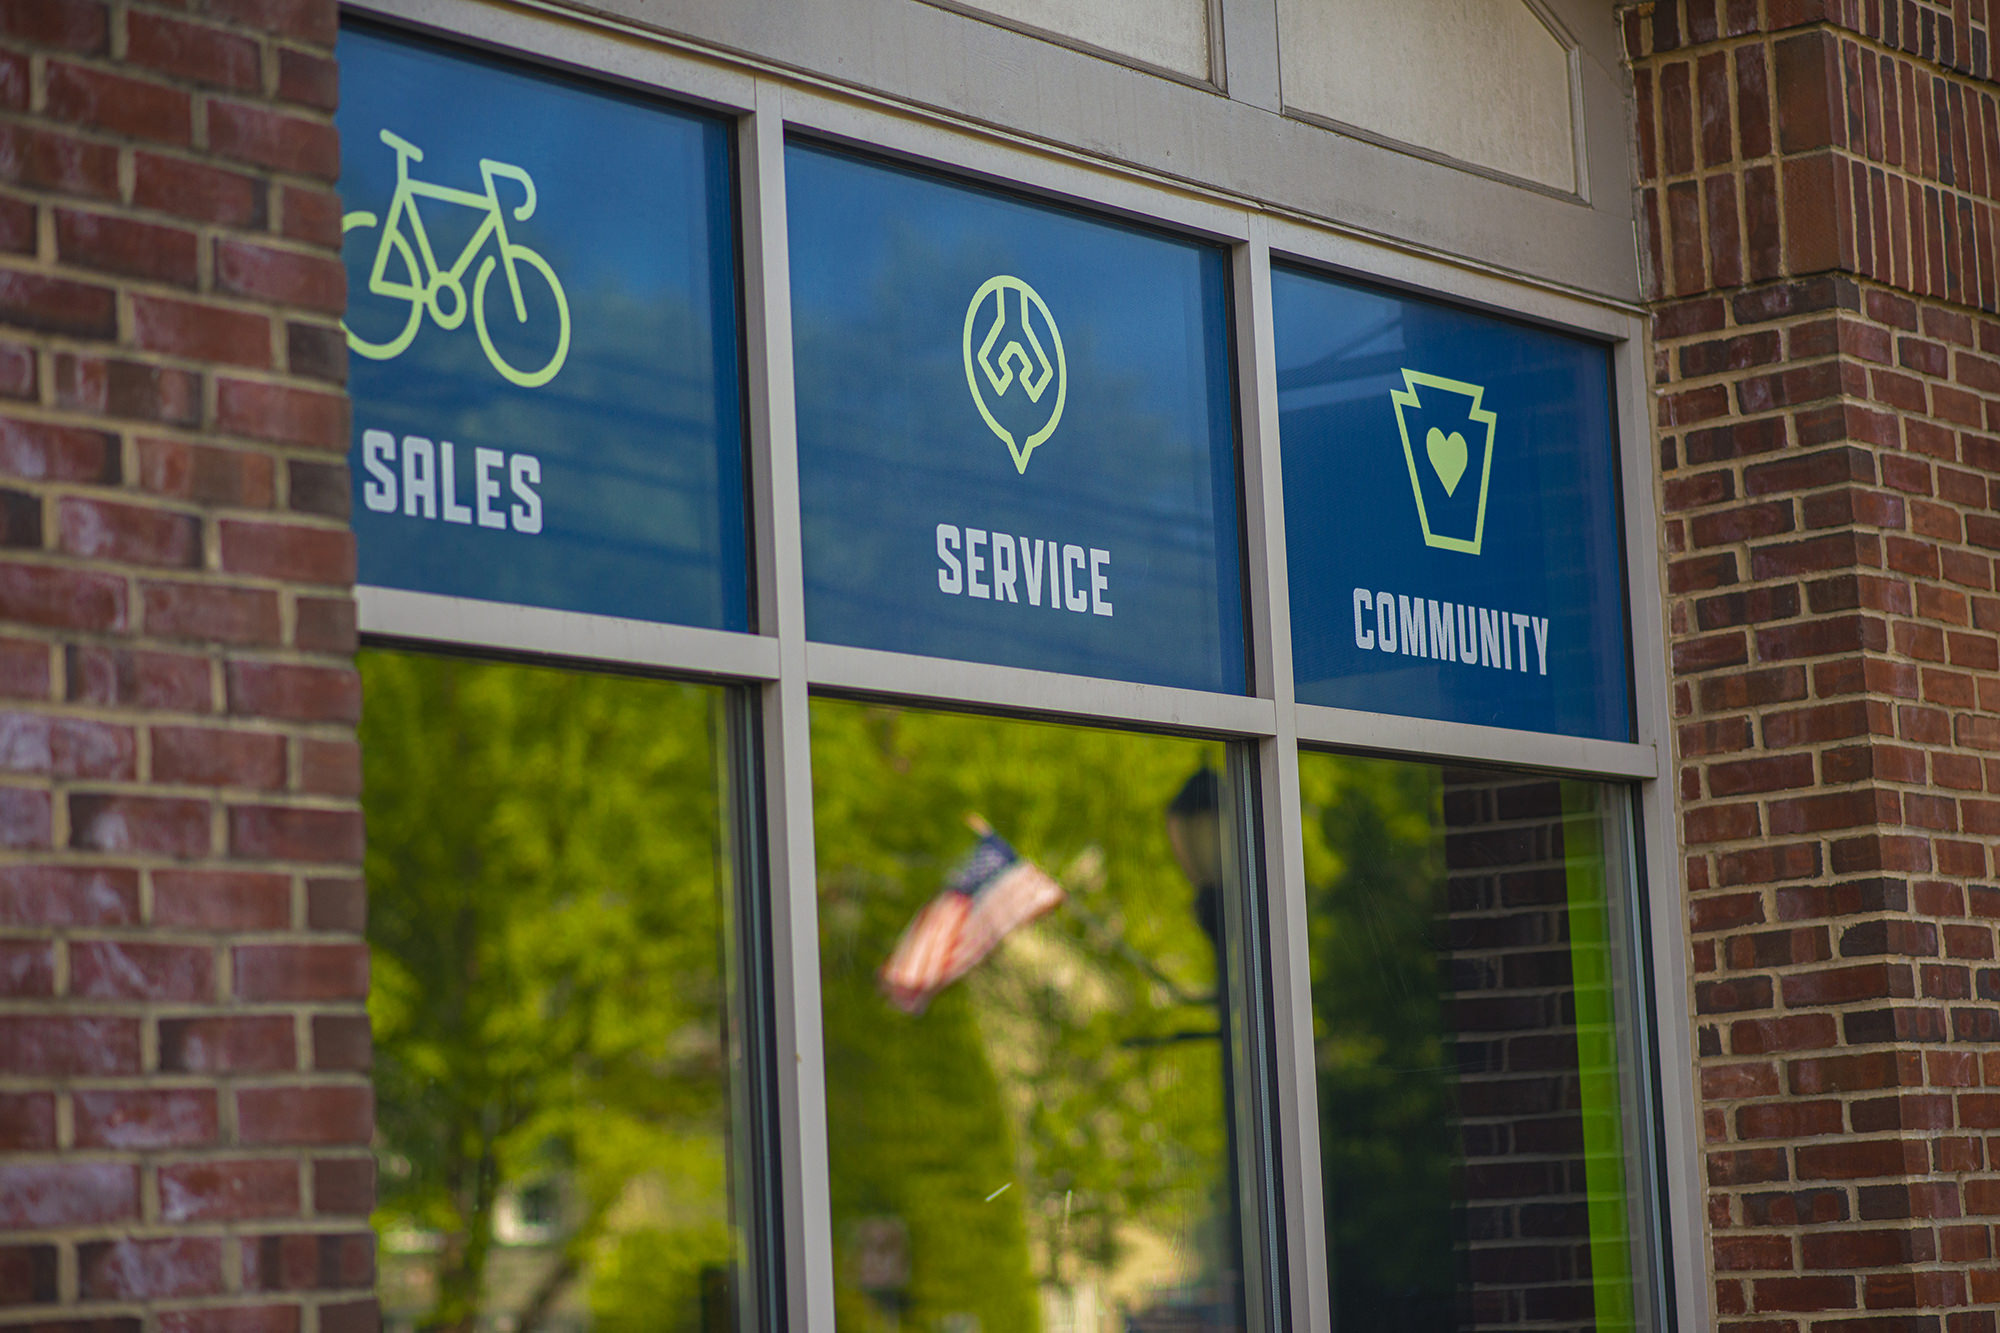 A new bike store in Newtown, PA